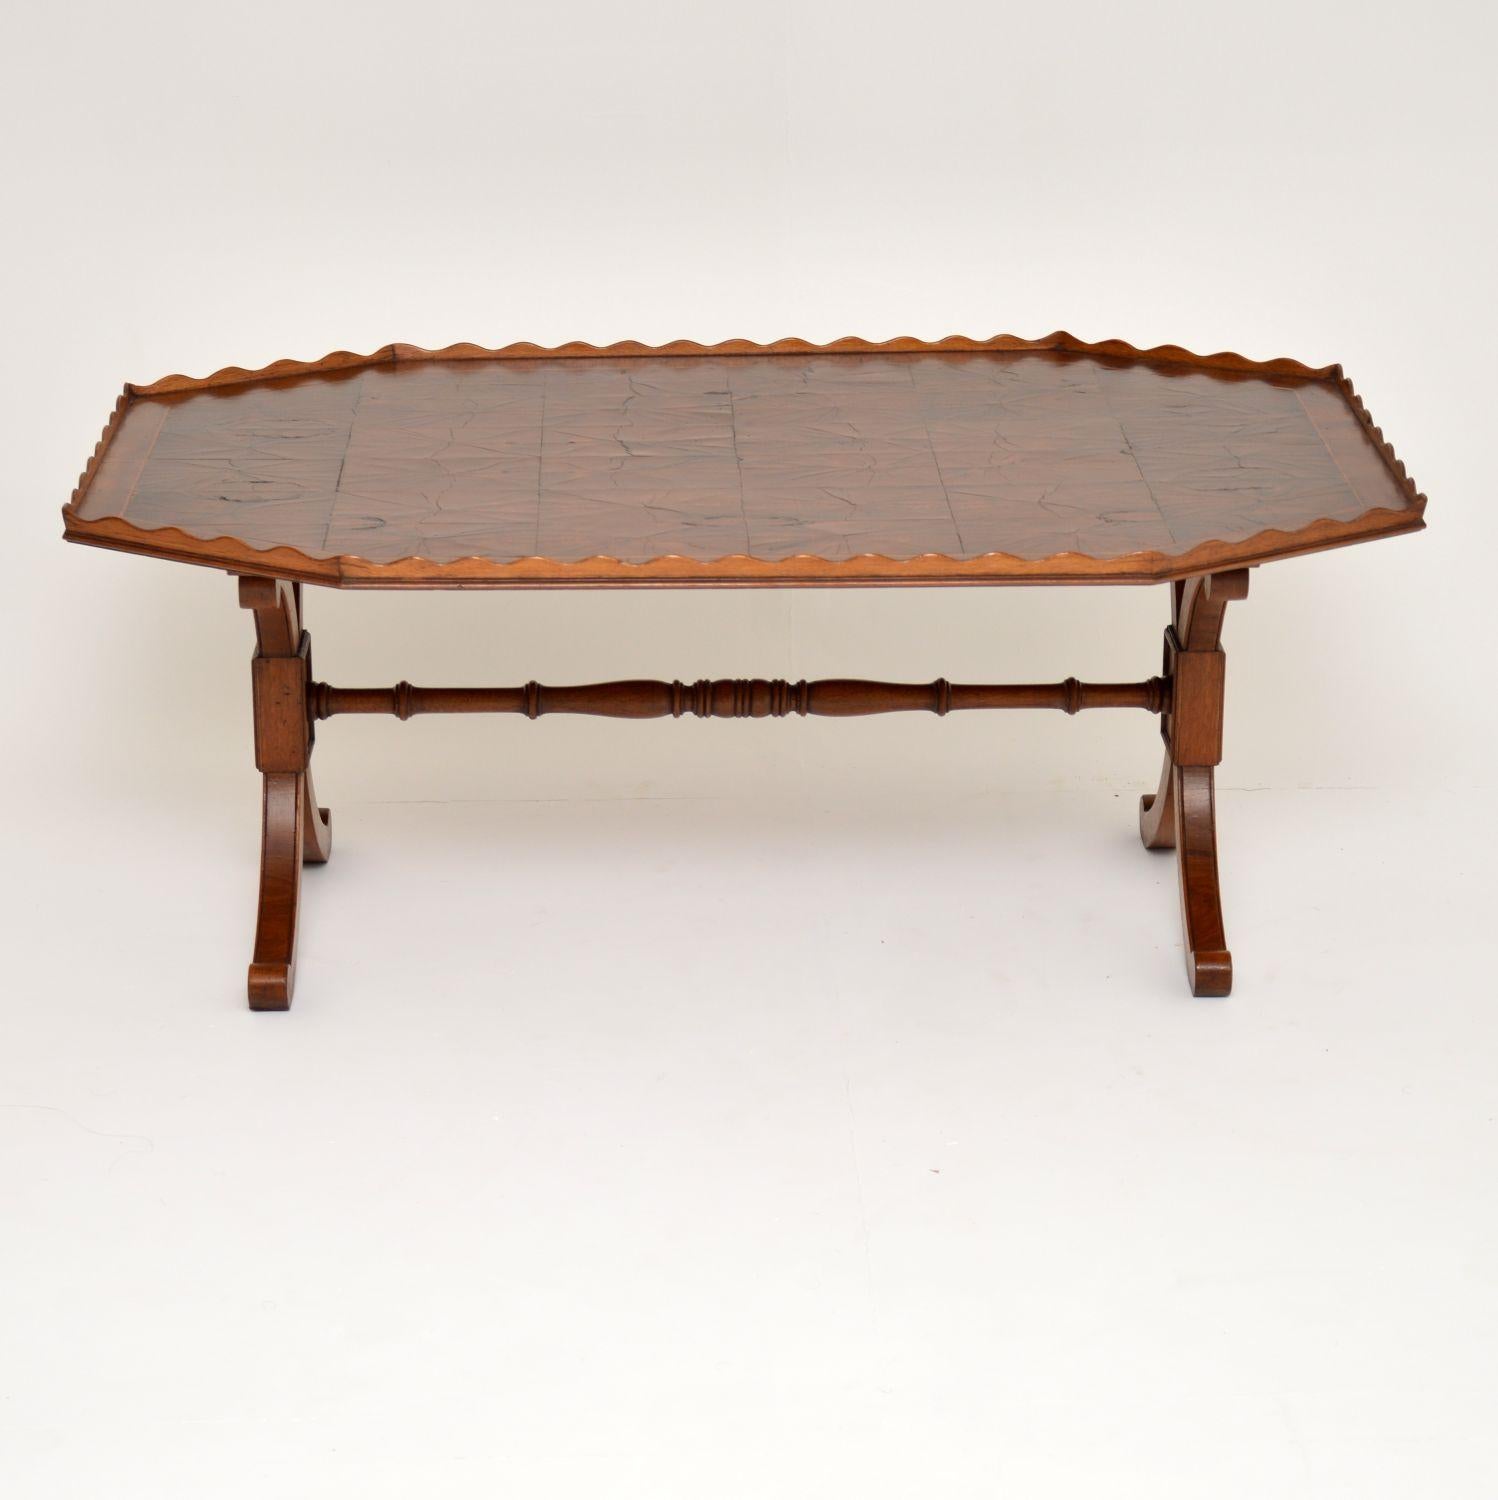 Antique yew wood and oyster veneer coffee table in good original condition and with loads of character. The top has a pie crust raised edge and there are many sections of oyster wood panels surrounded by yew wood cross banding. It sits on ‘X’ framed